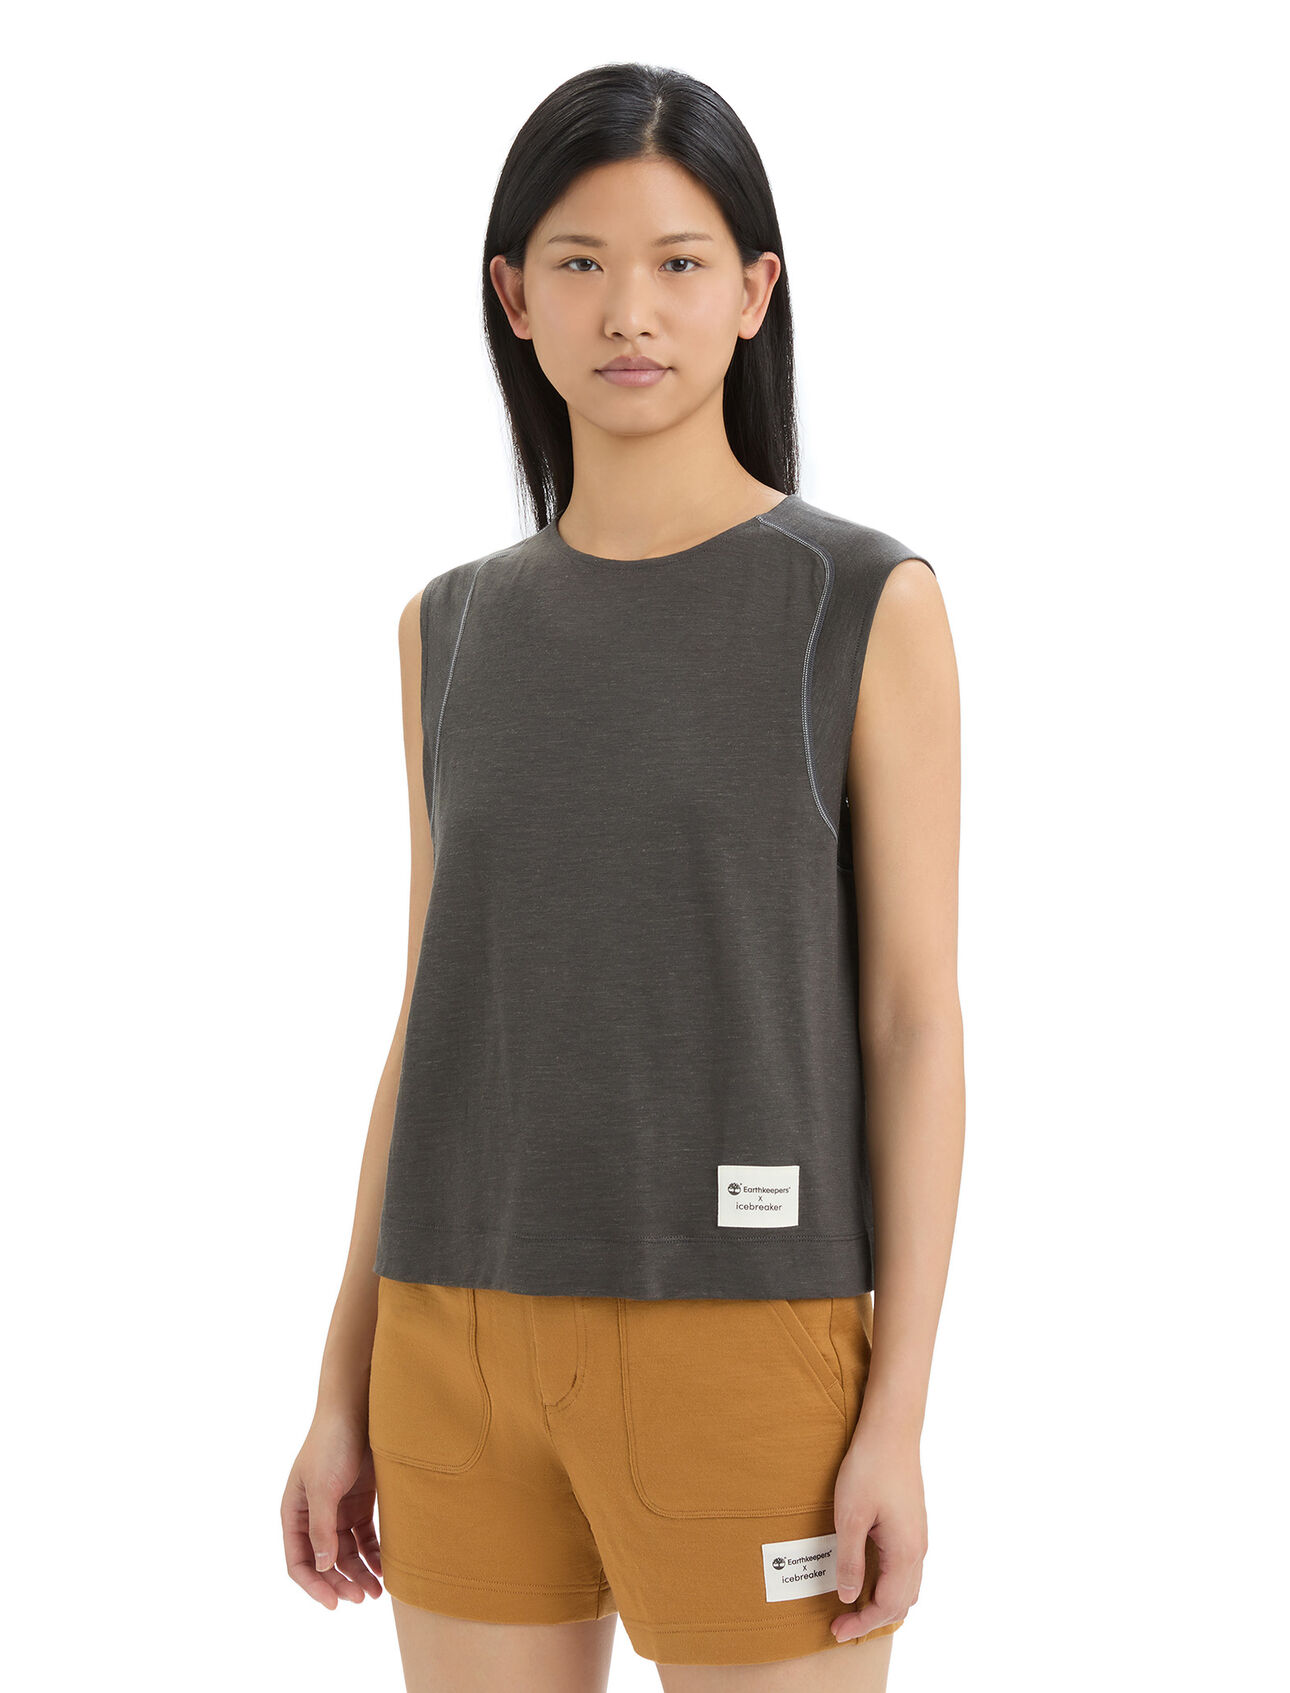 Womens Timberland x icebreaker Merino Linen Sleeveless Top Designed in collaboration with Timberland, the Timberland x icebreaker Merino Linen Sleeveless Top is a casual warm-weather piece that blend the natural performance of merino with the soft, airy comfort of linen. 